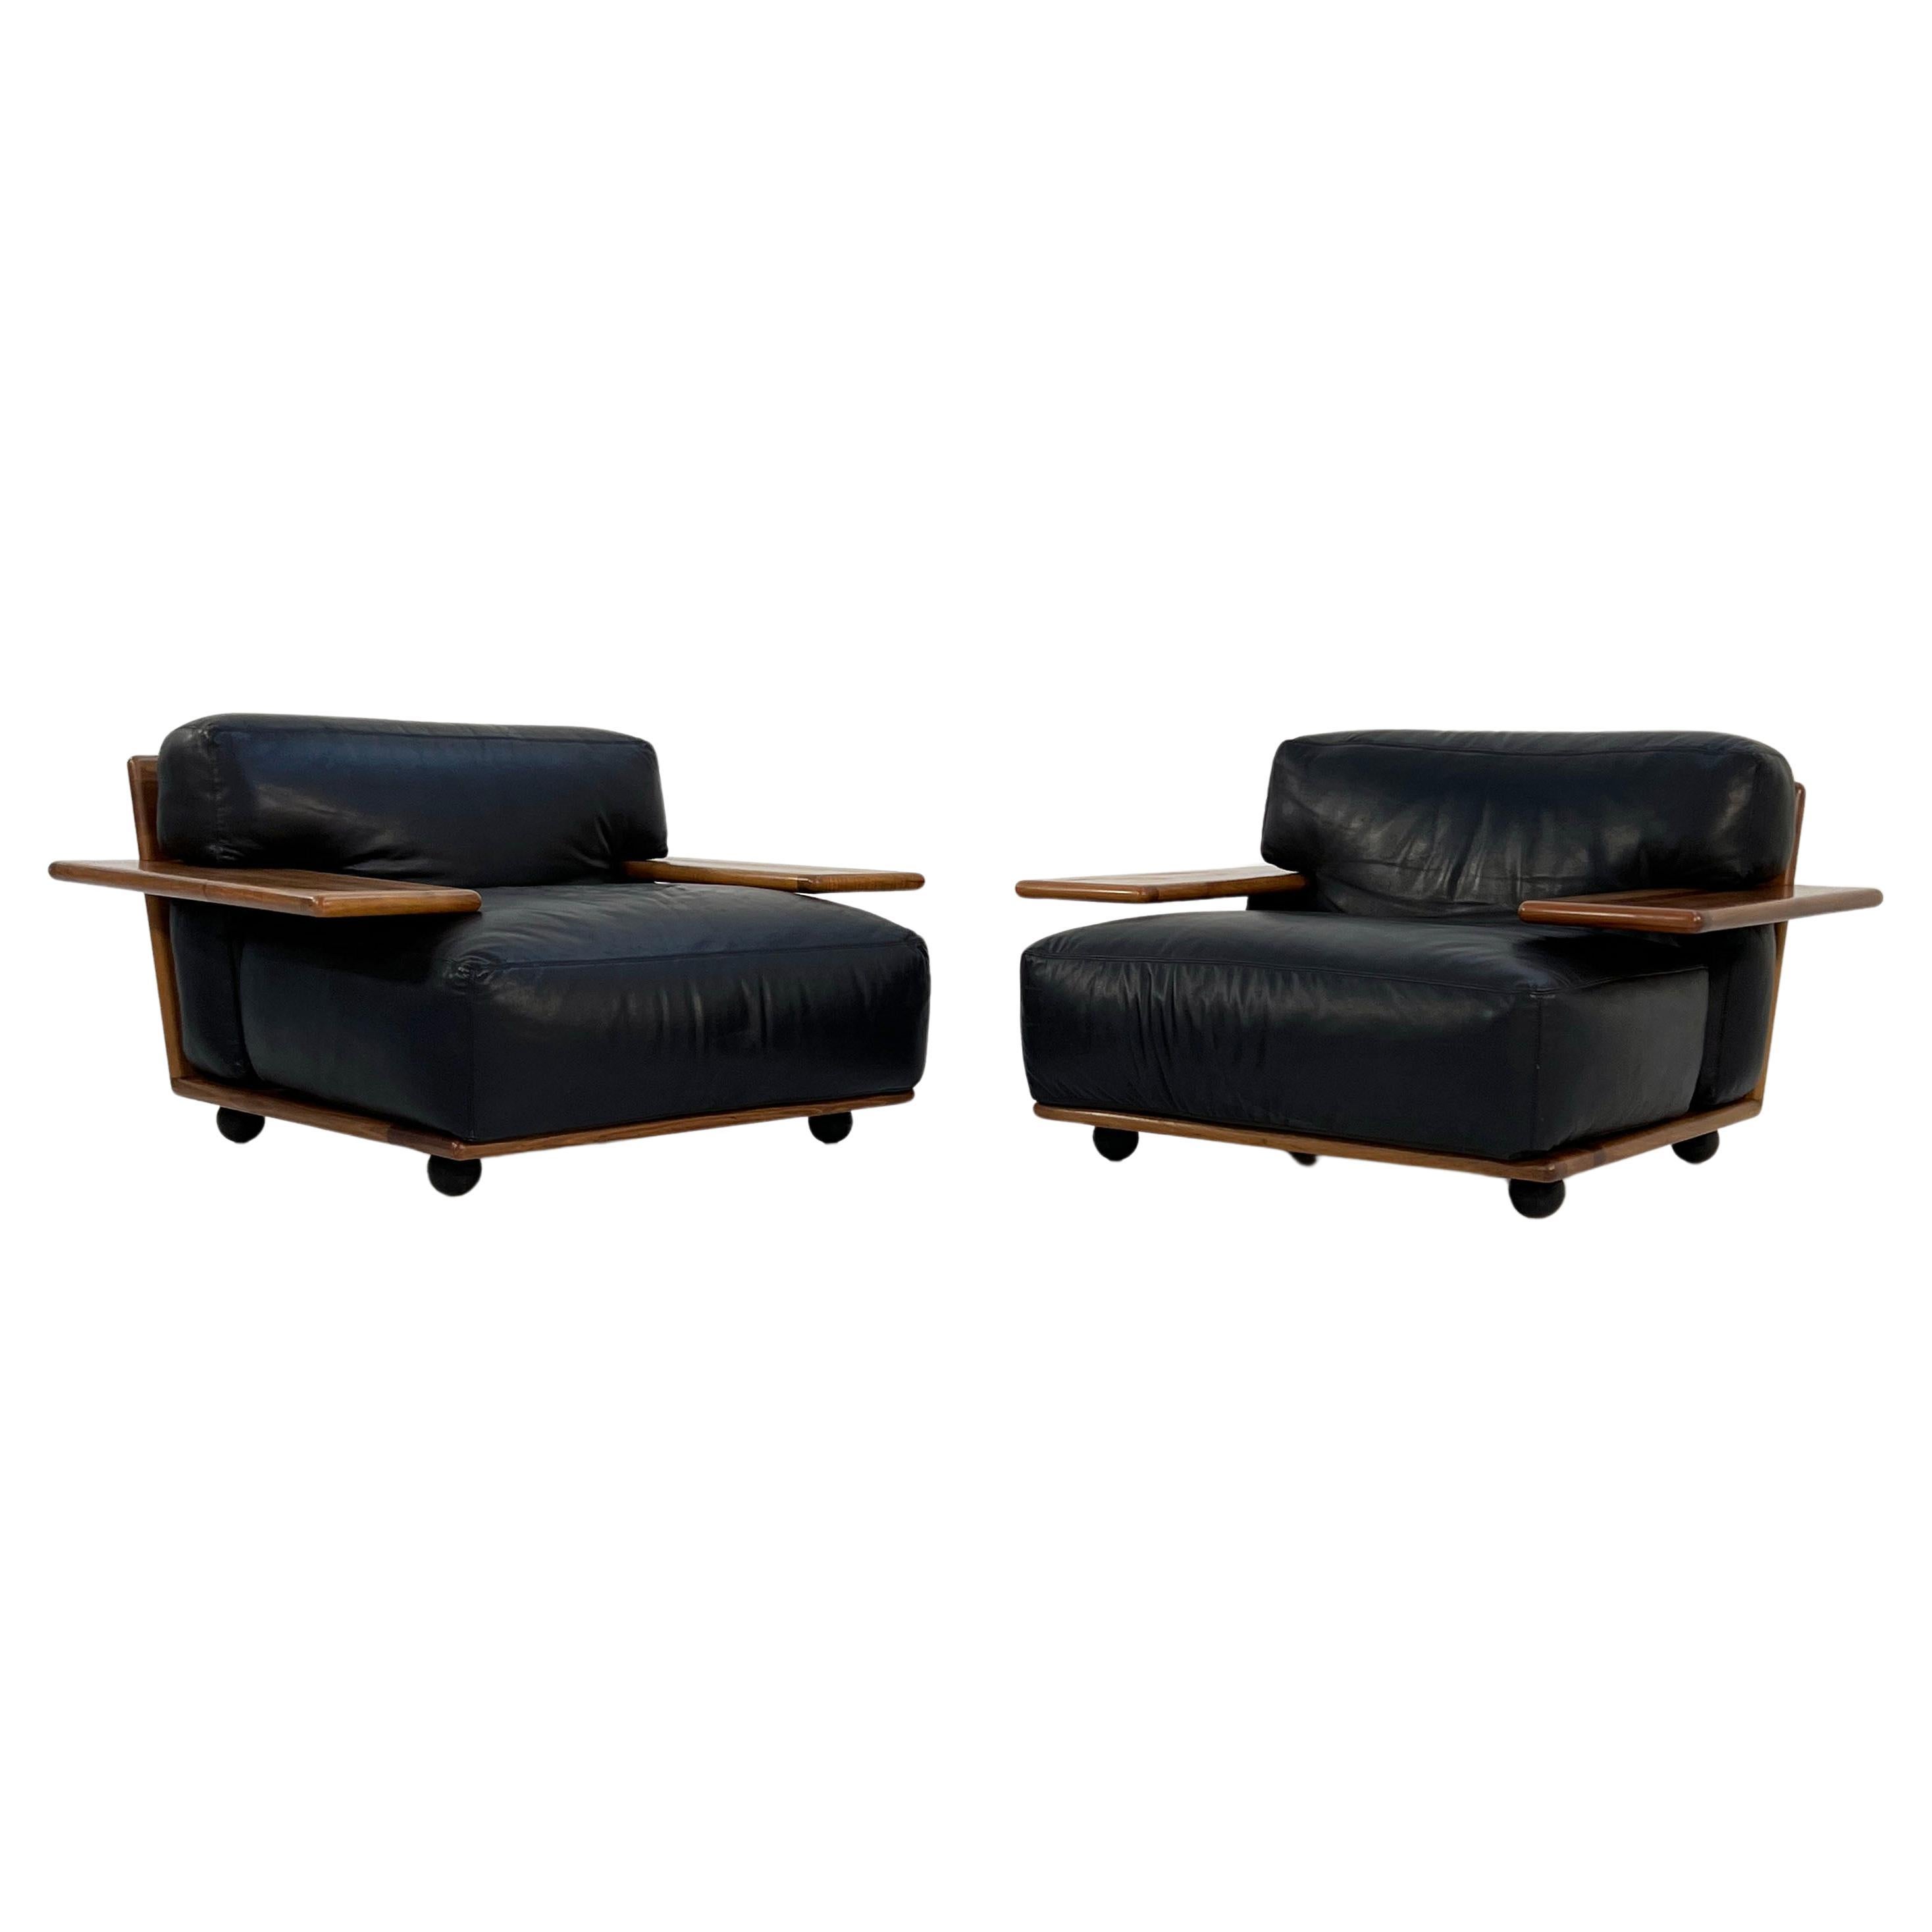 Pianura Armchair in Black Leather by Mario Bellini for Cassina, 1970s